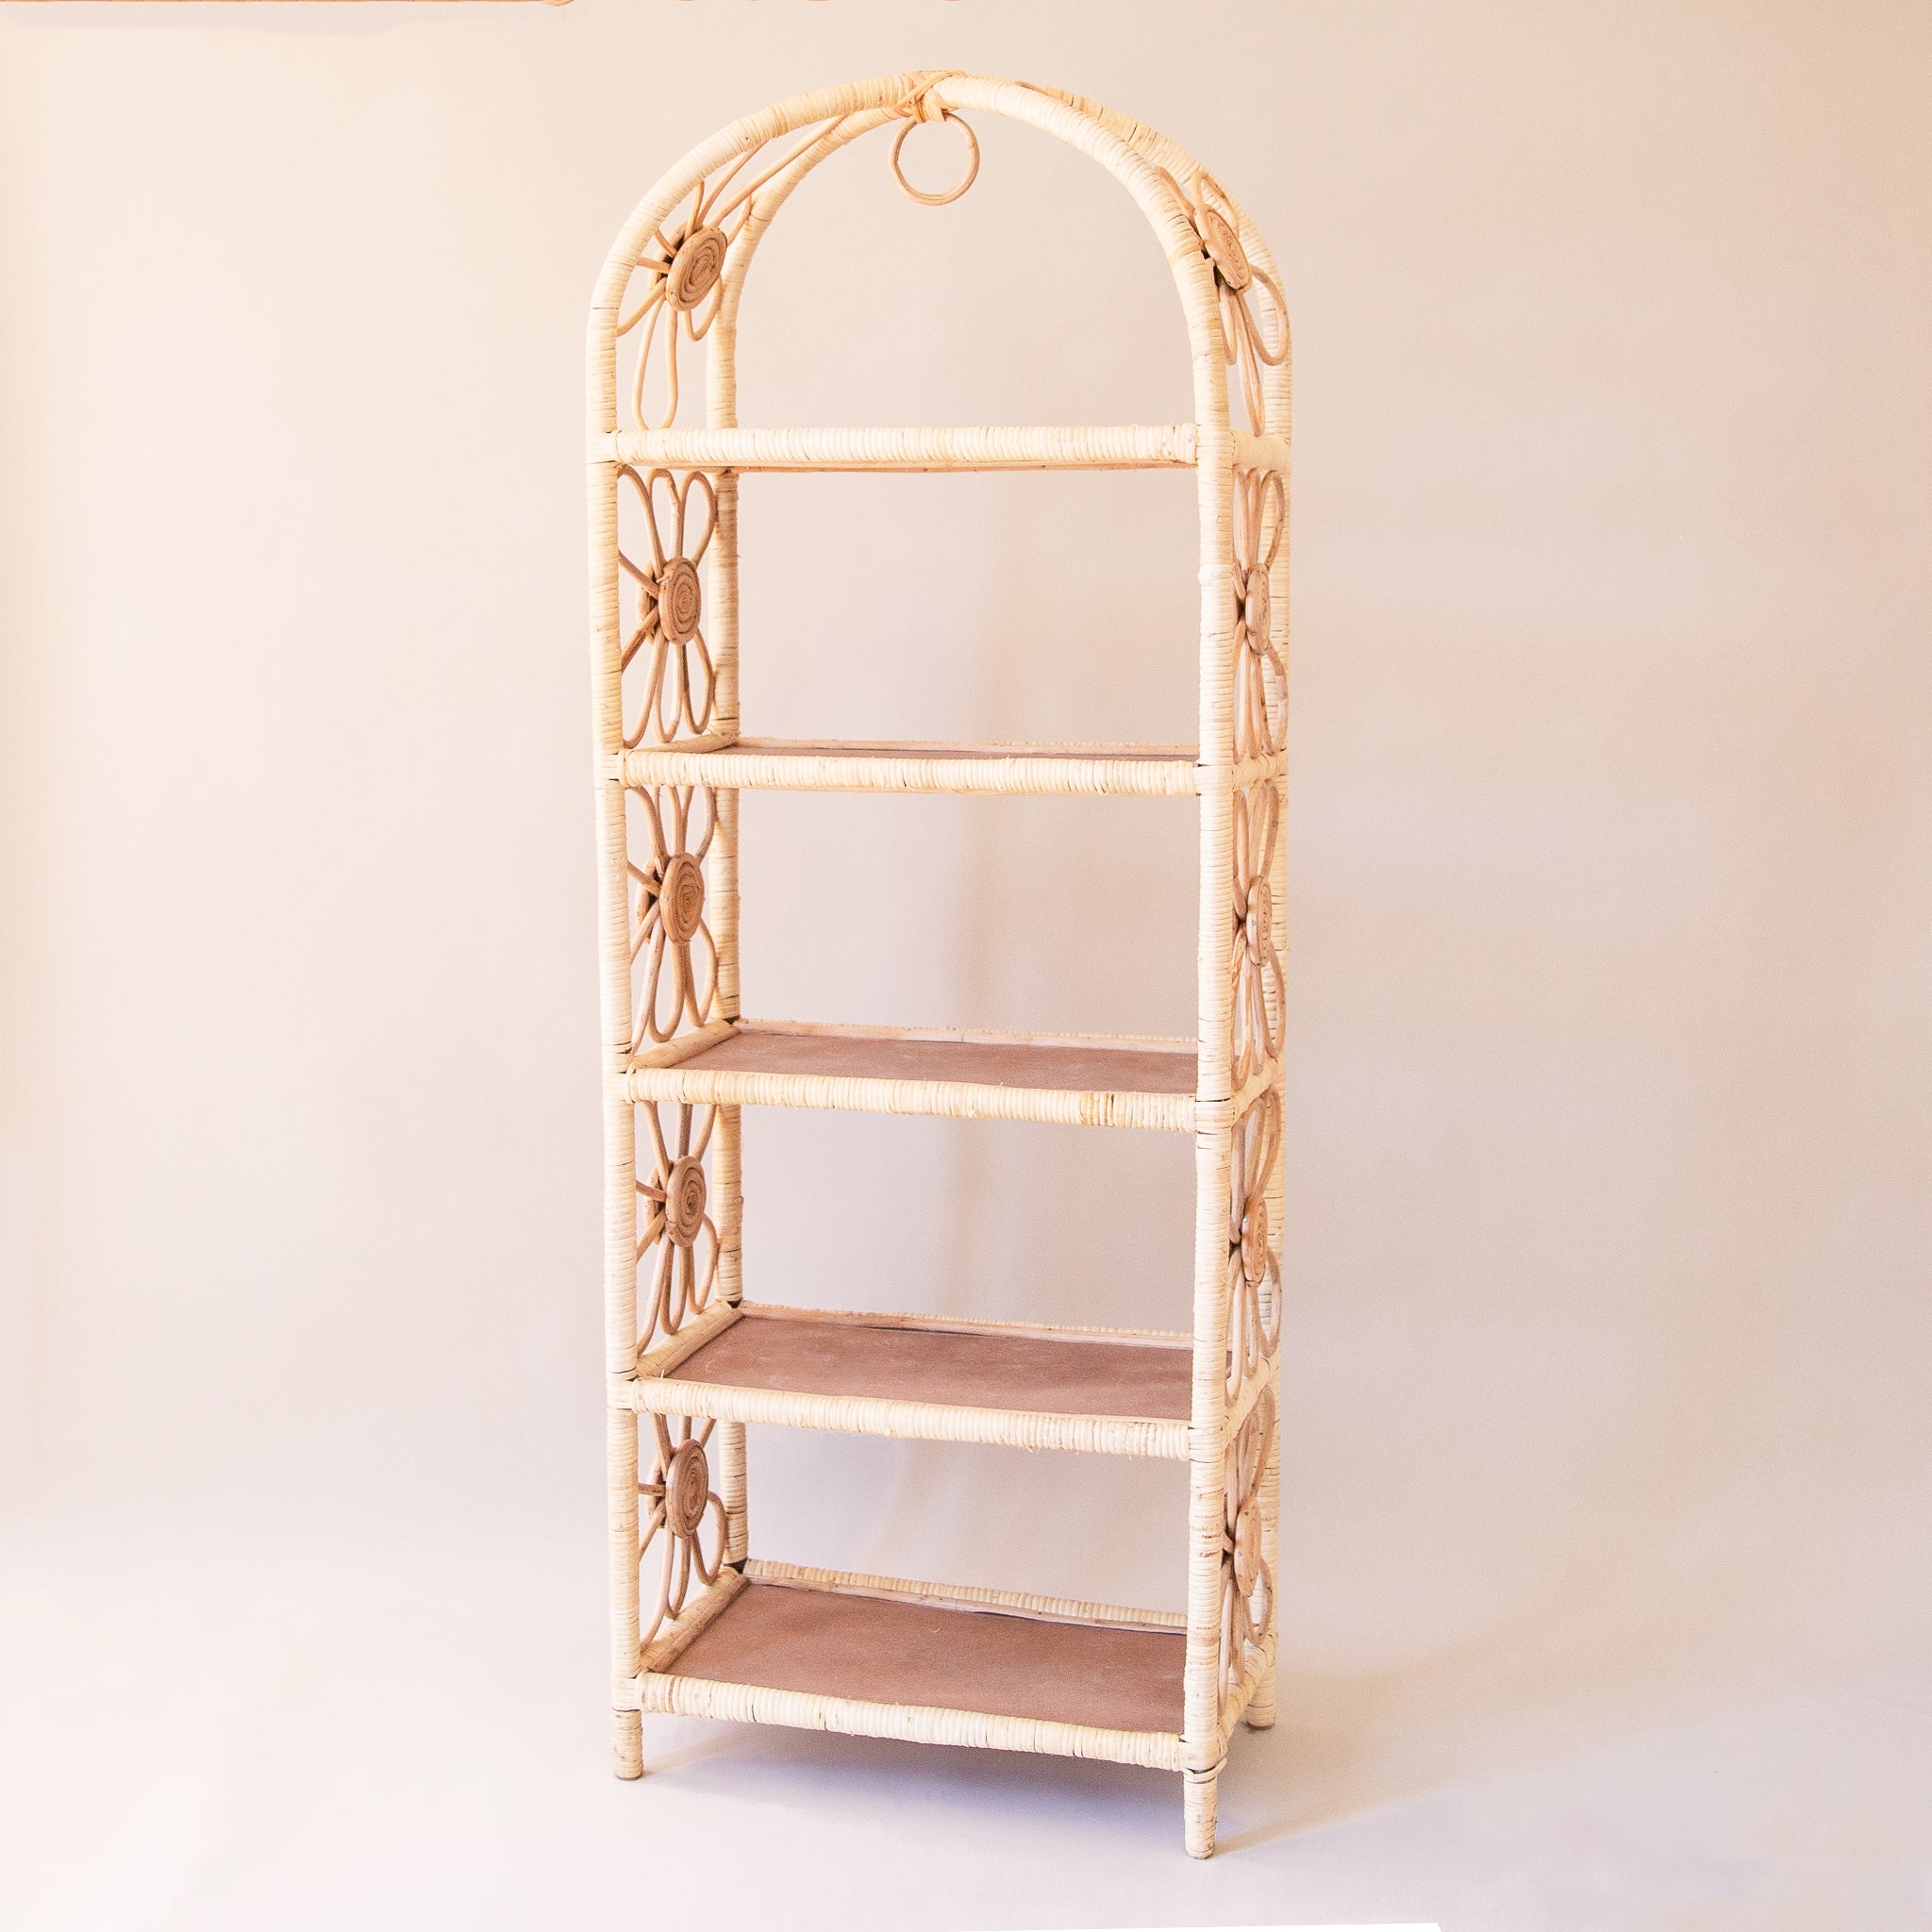 The large version of the shelf. Natural woven rattan shelf with daisy accents on both sides. The sides are open and let in ample light to keep the shelves well lit. Each shelf is covered in rattan and has a chocolate brown bottom